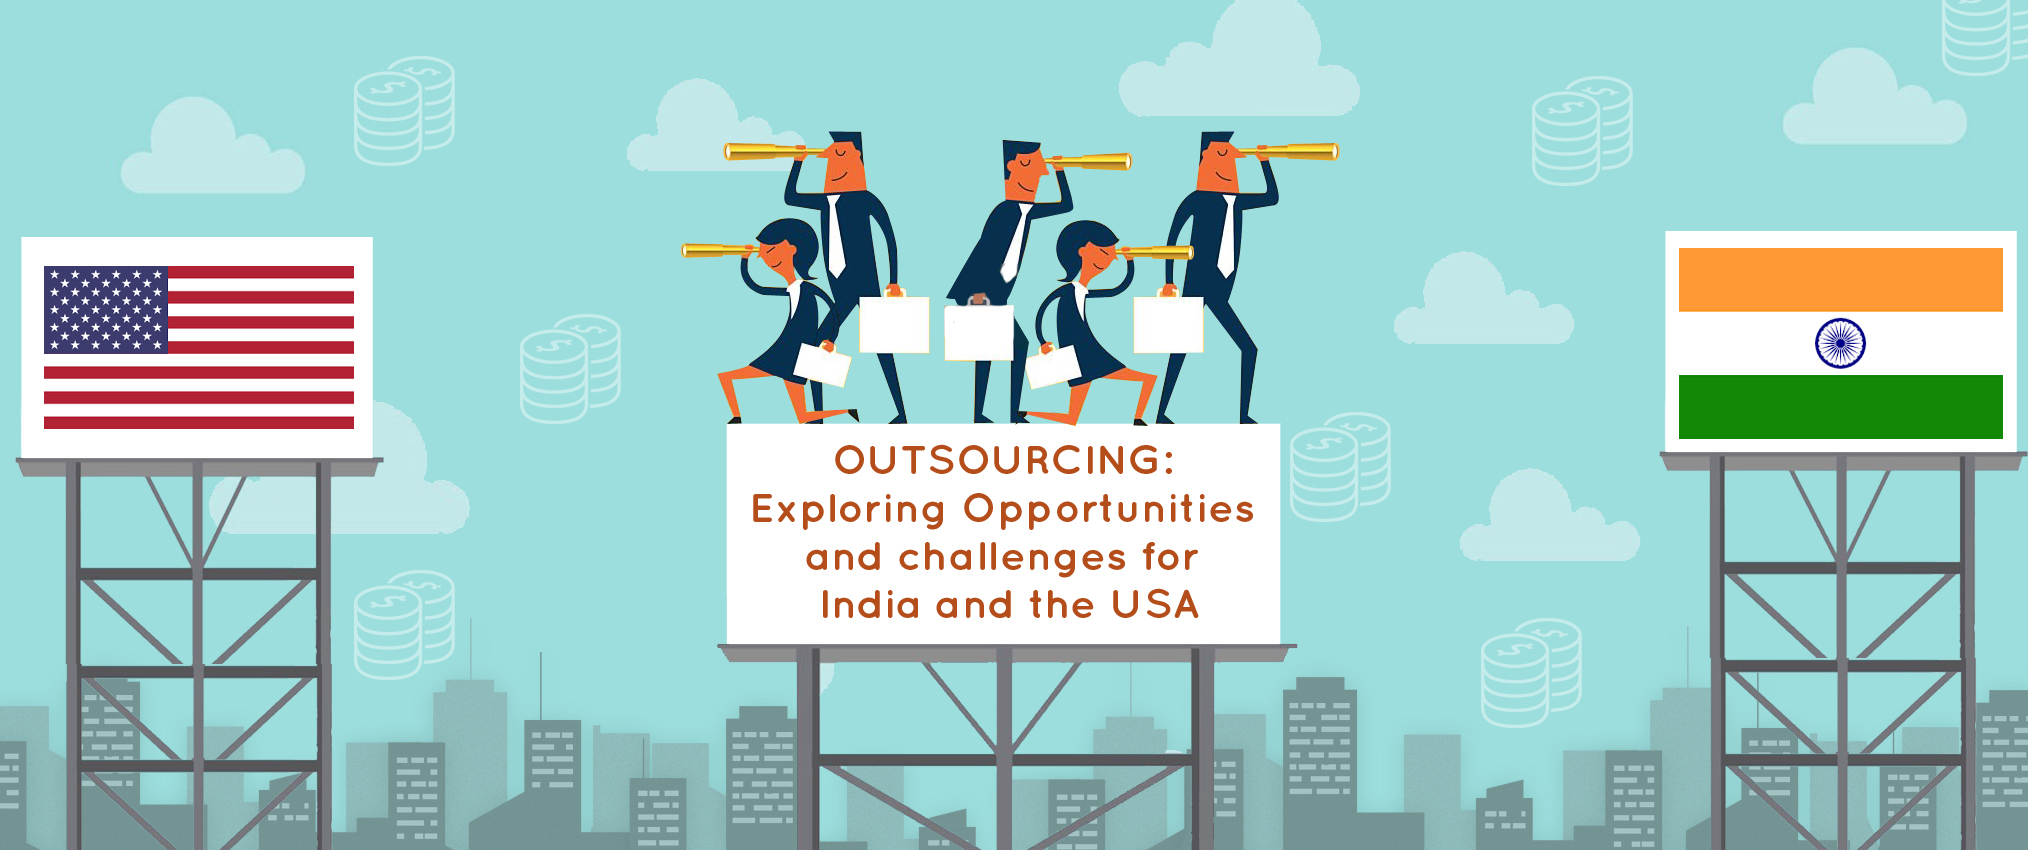 Outsourcing Exploring Opportunities and challenges for India and the USA